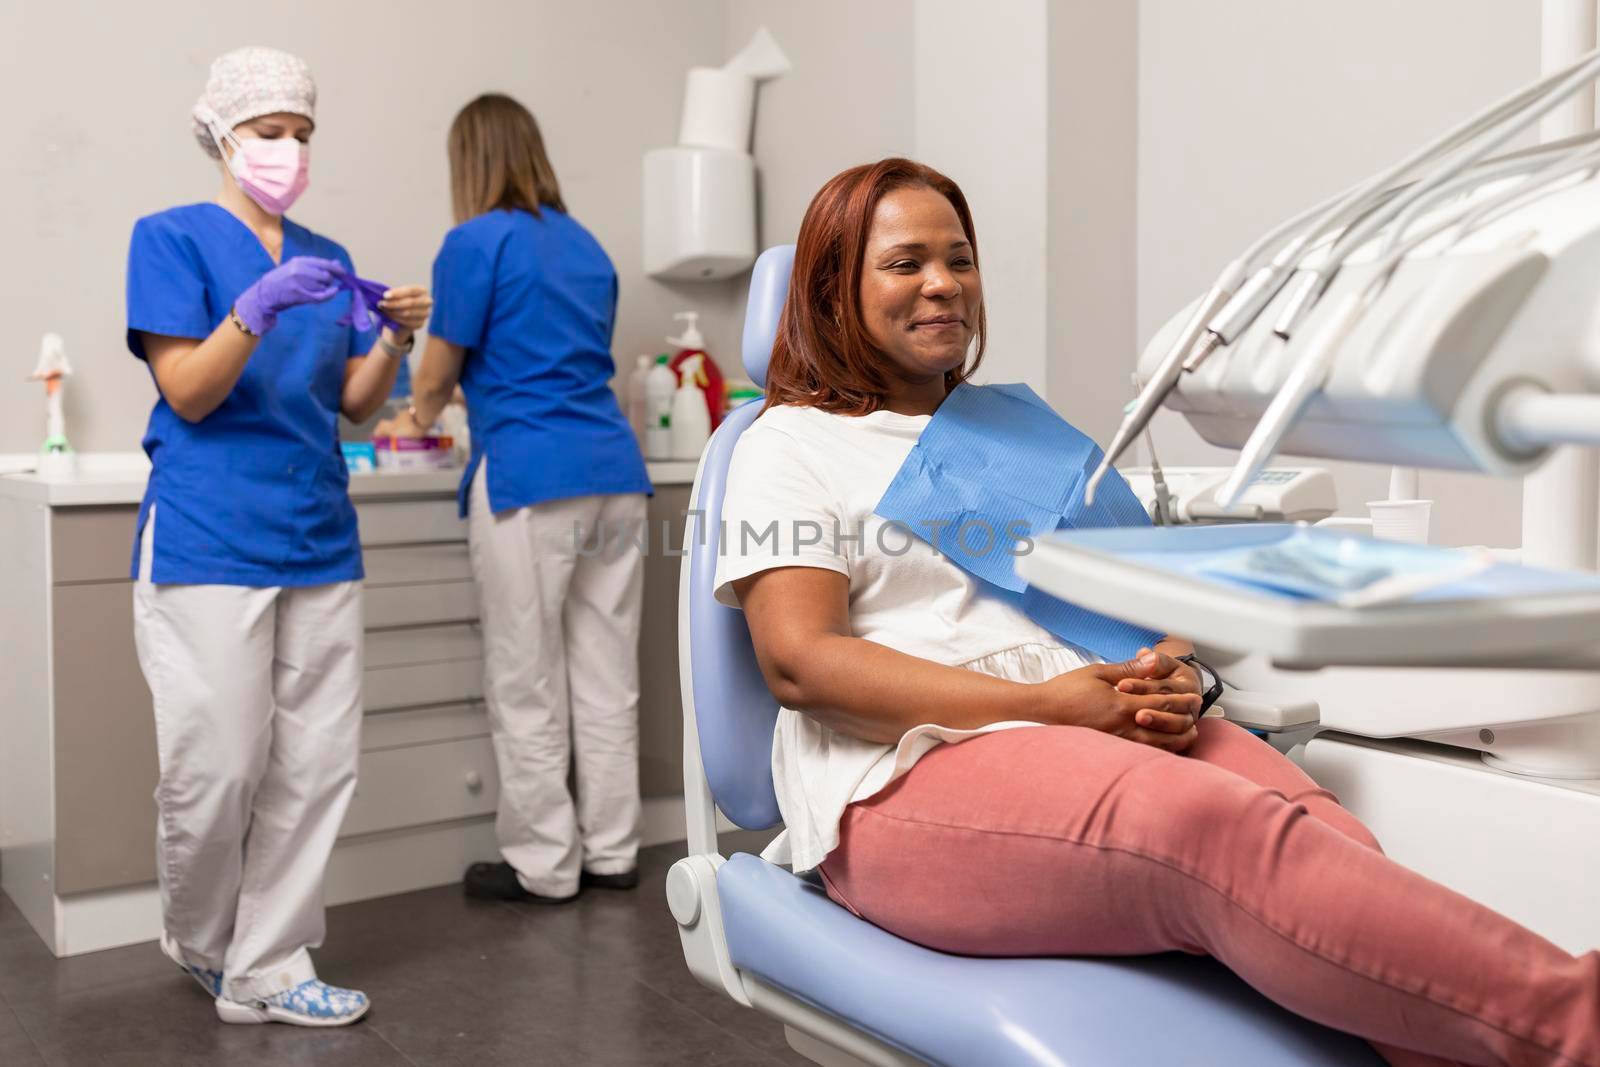 The patient waits at the dental chair for the dentist and her assistant, while they prepare the tools and equipment for the treatment at the dental clinic